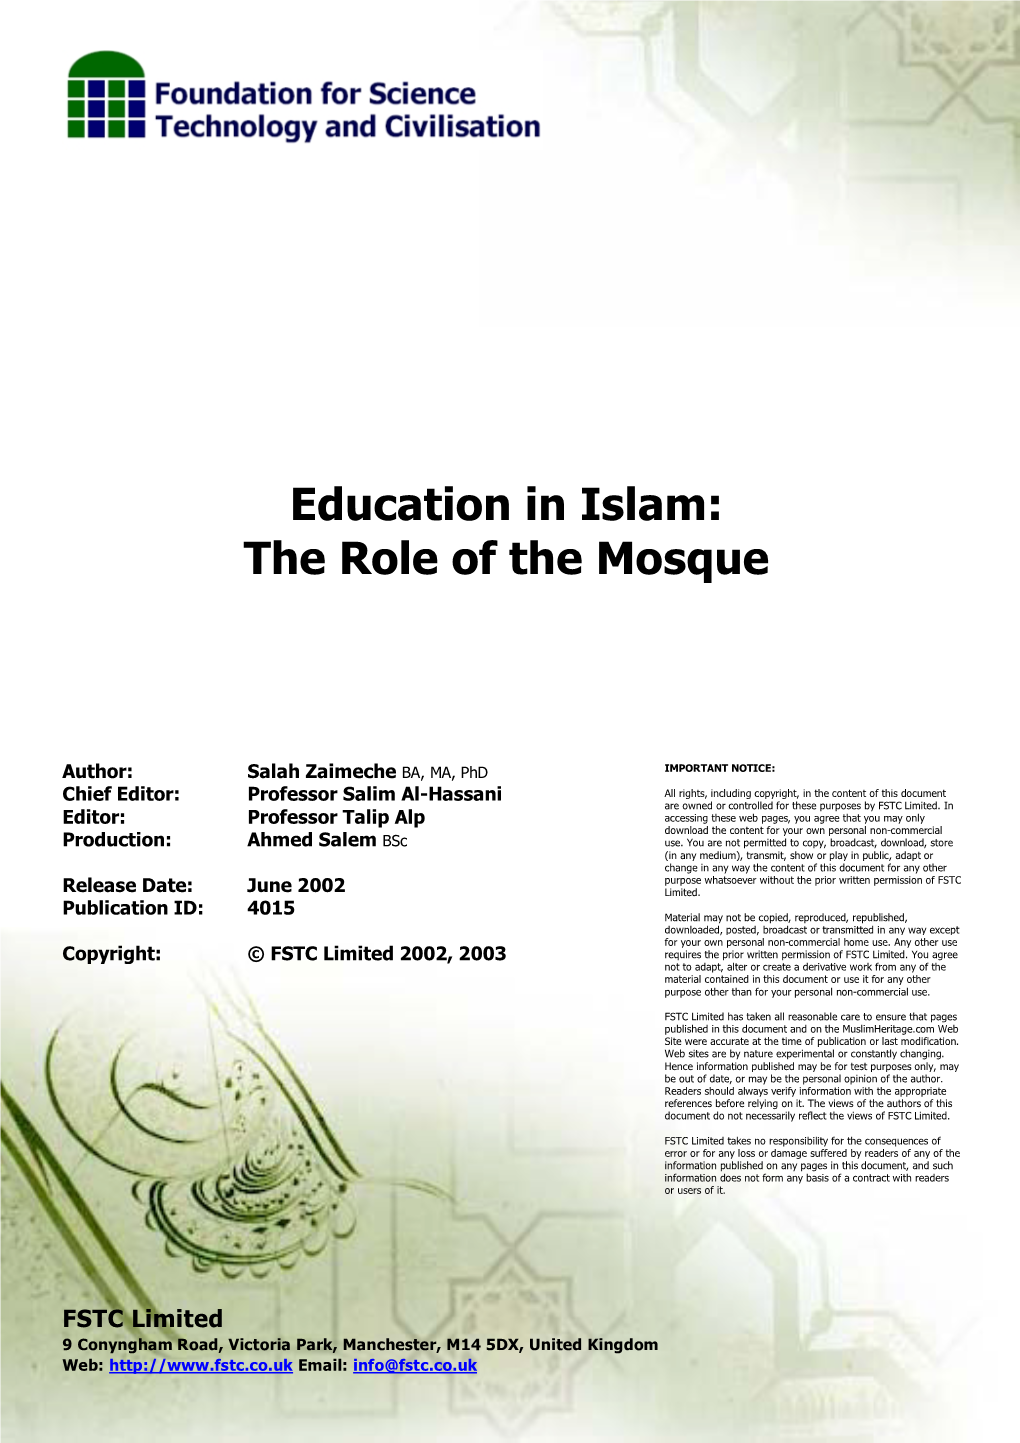 Education in Islam: the Role of the Mosque